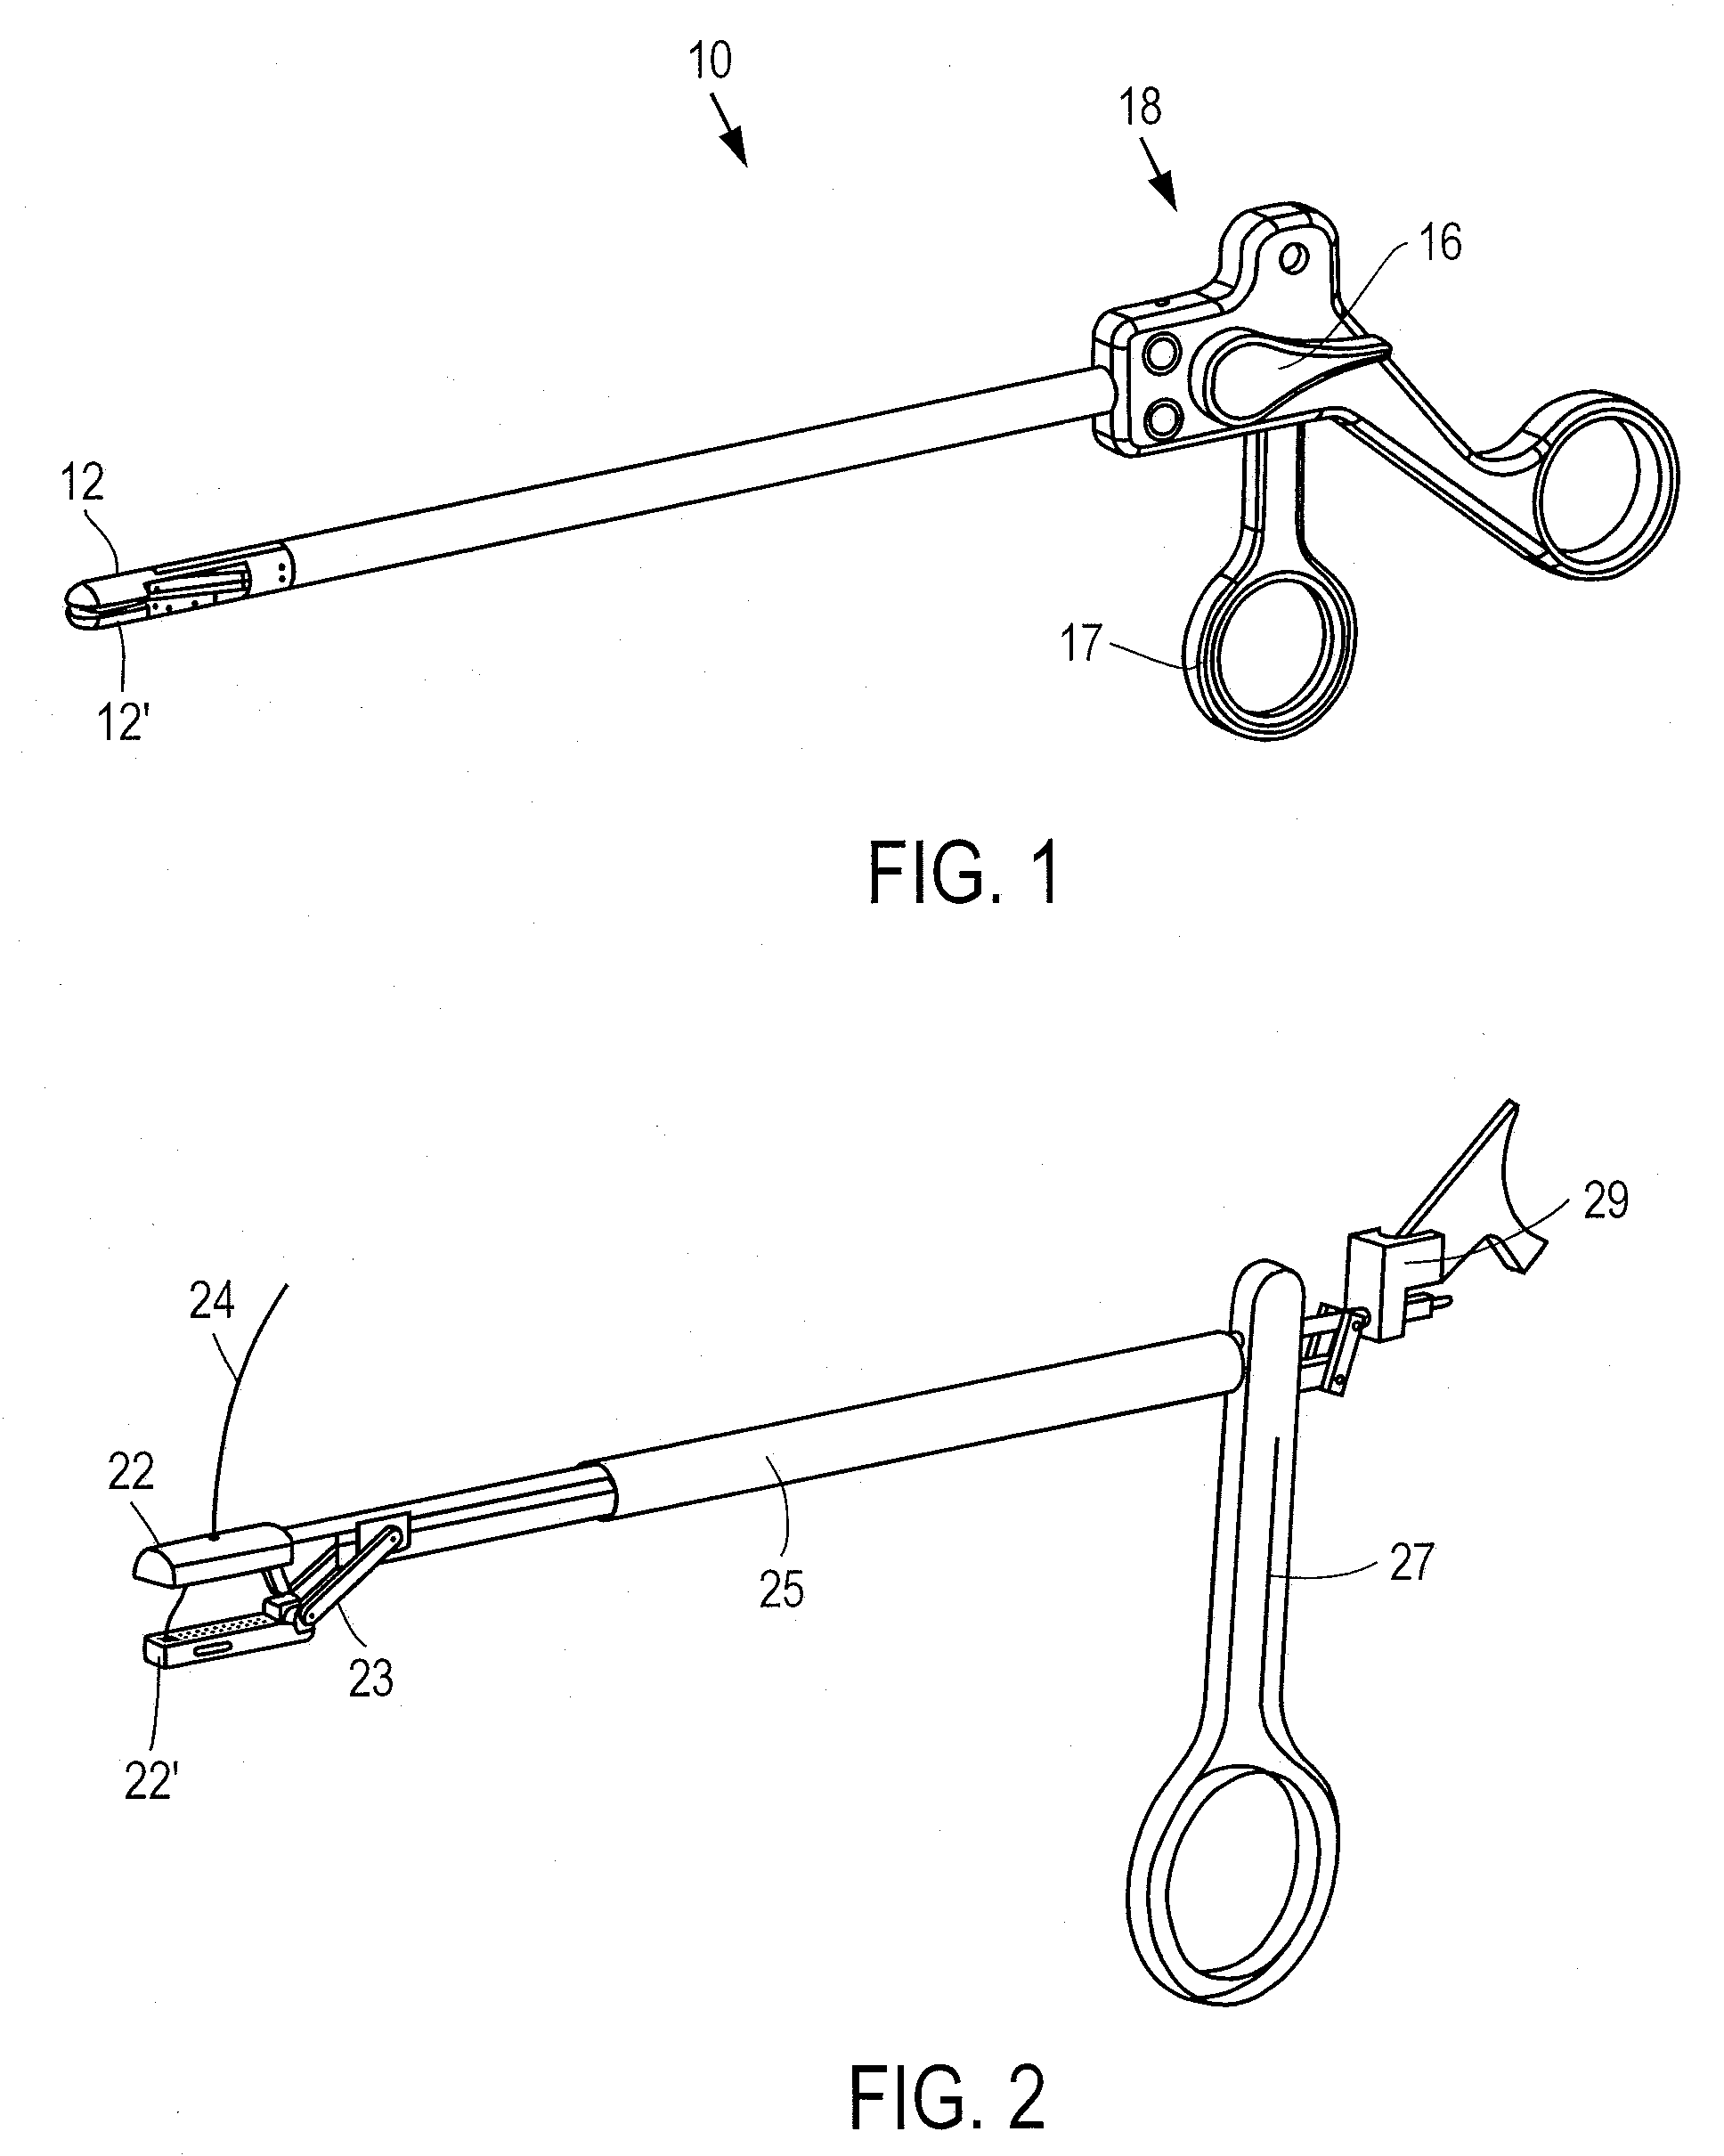 Methods and devices for continuous suture passing